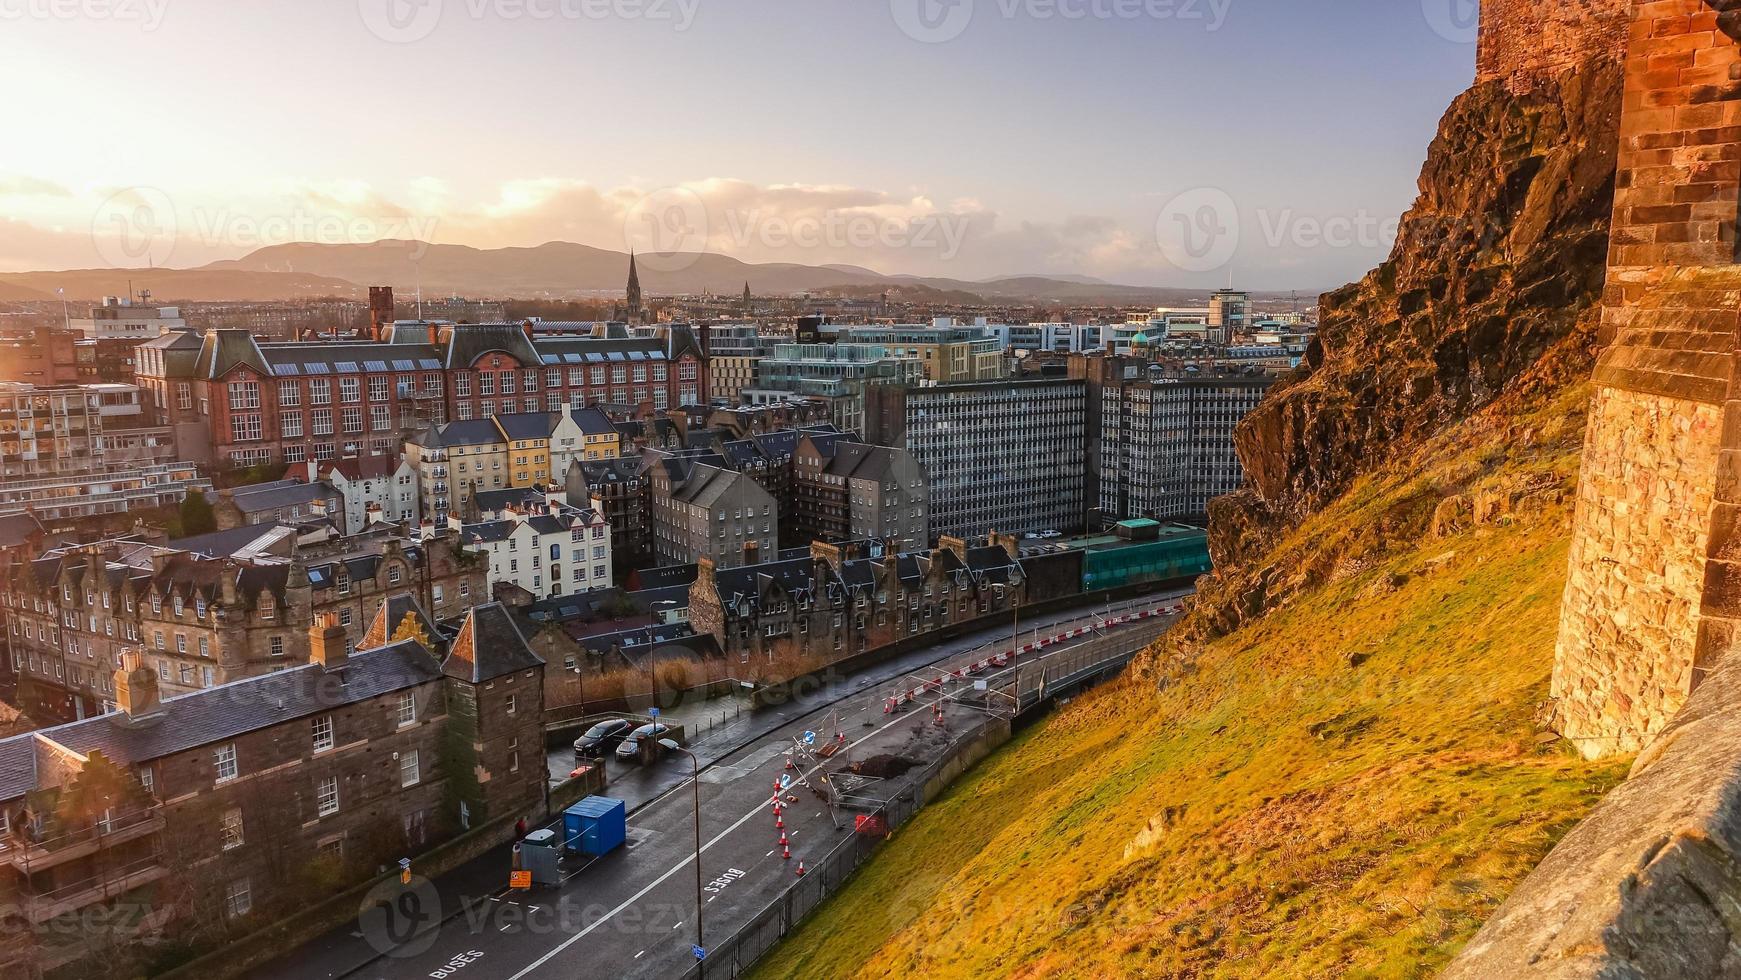 View to the Old Town of Edinburgh photo